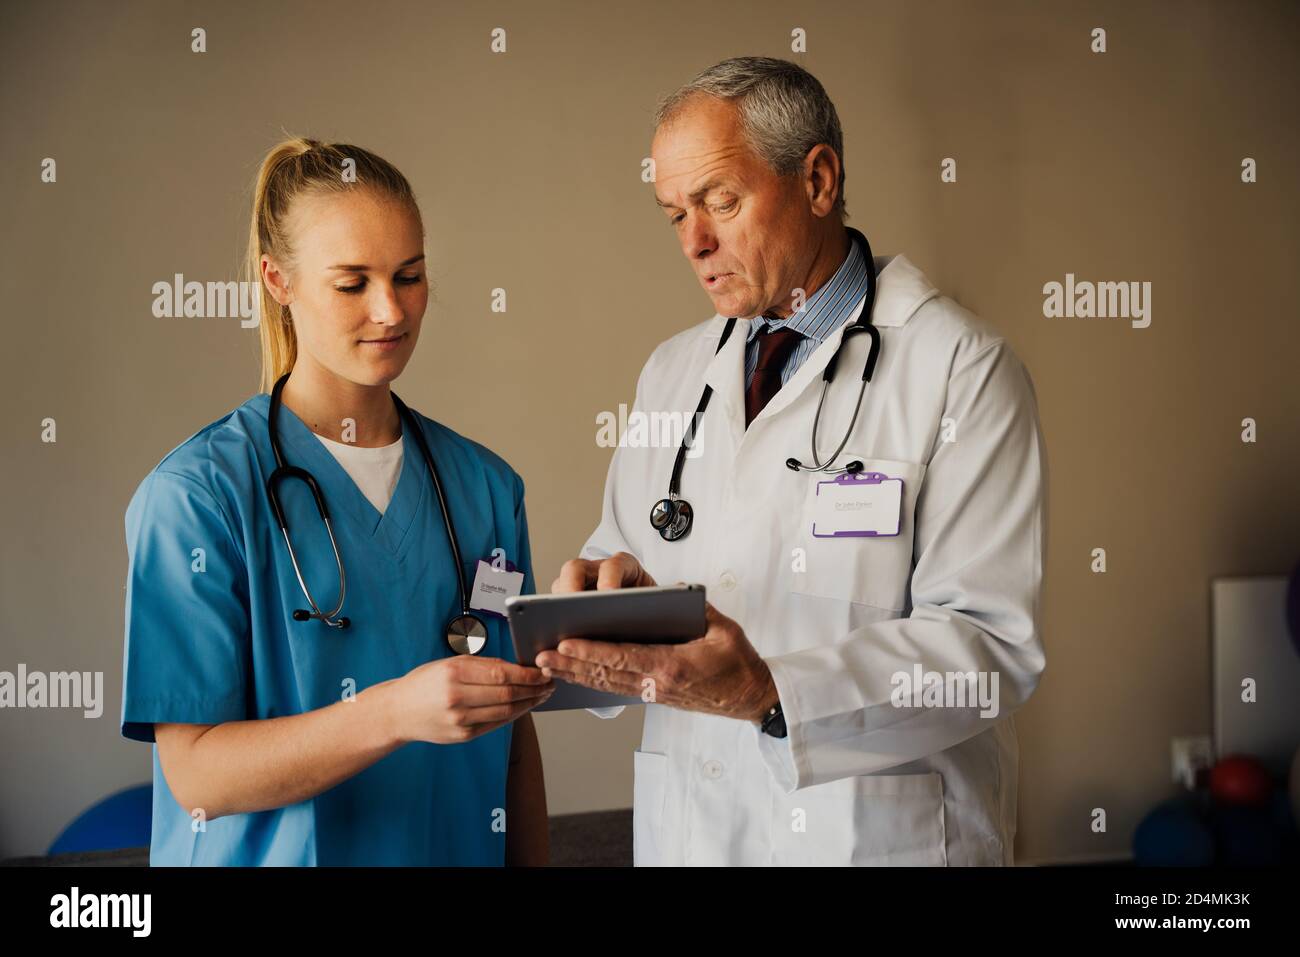 Male doctor teaching female intern in scrubs, while showing instructions on digital tablet in organised doctors room Stock Photo